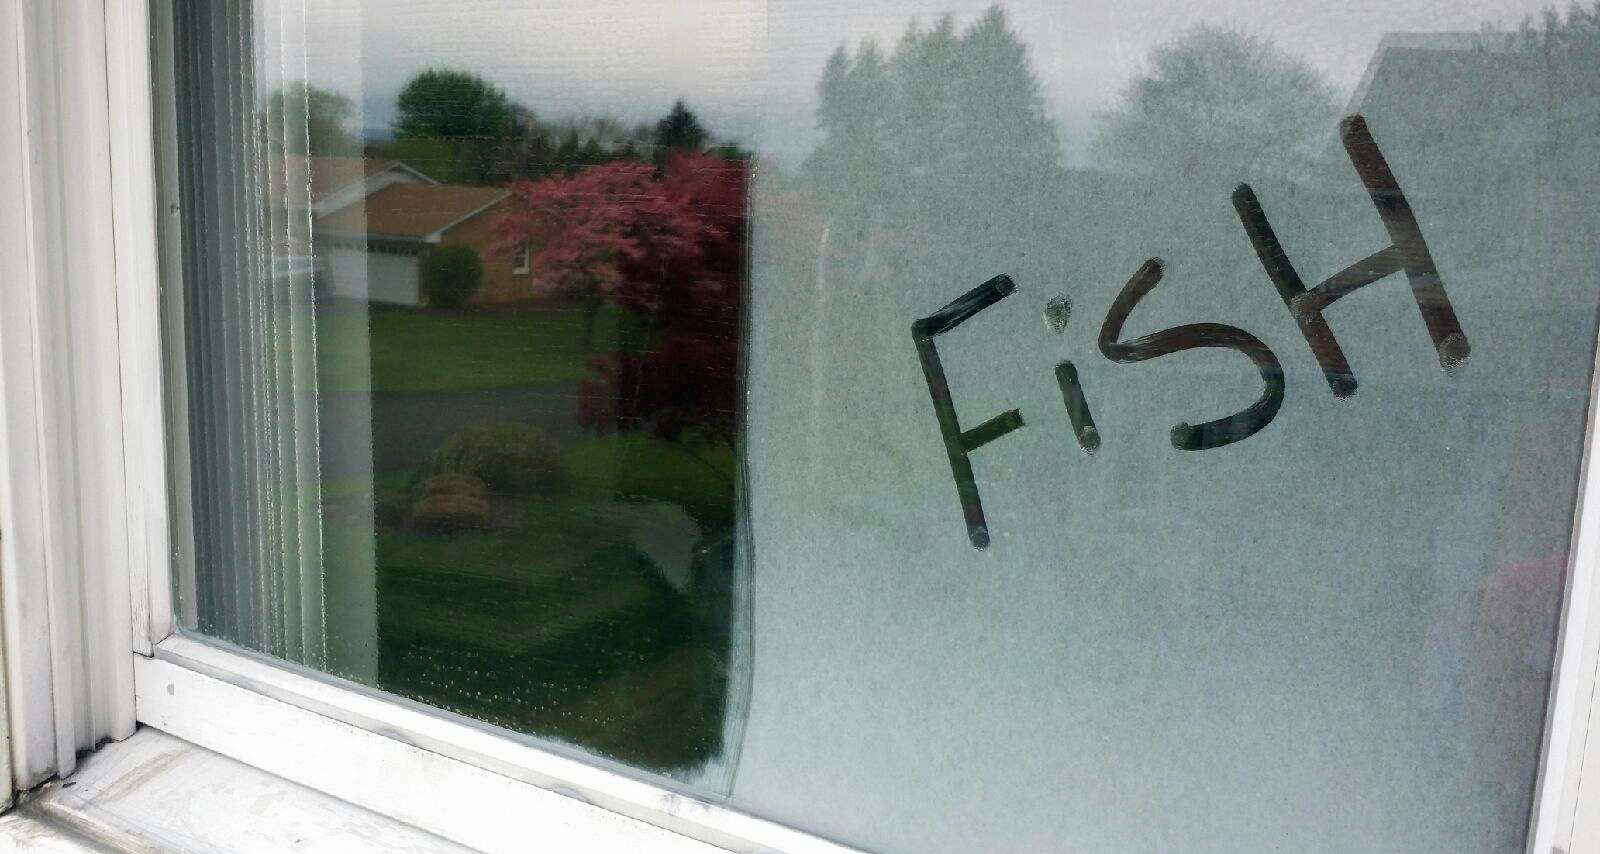 Image of Dirty Window with Clean Glass on One Side and FISH Written in Dirt on Other Side